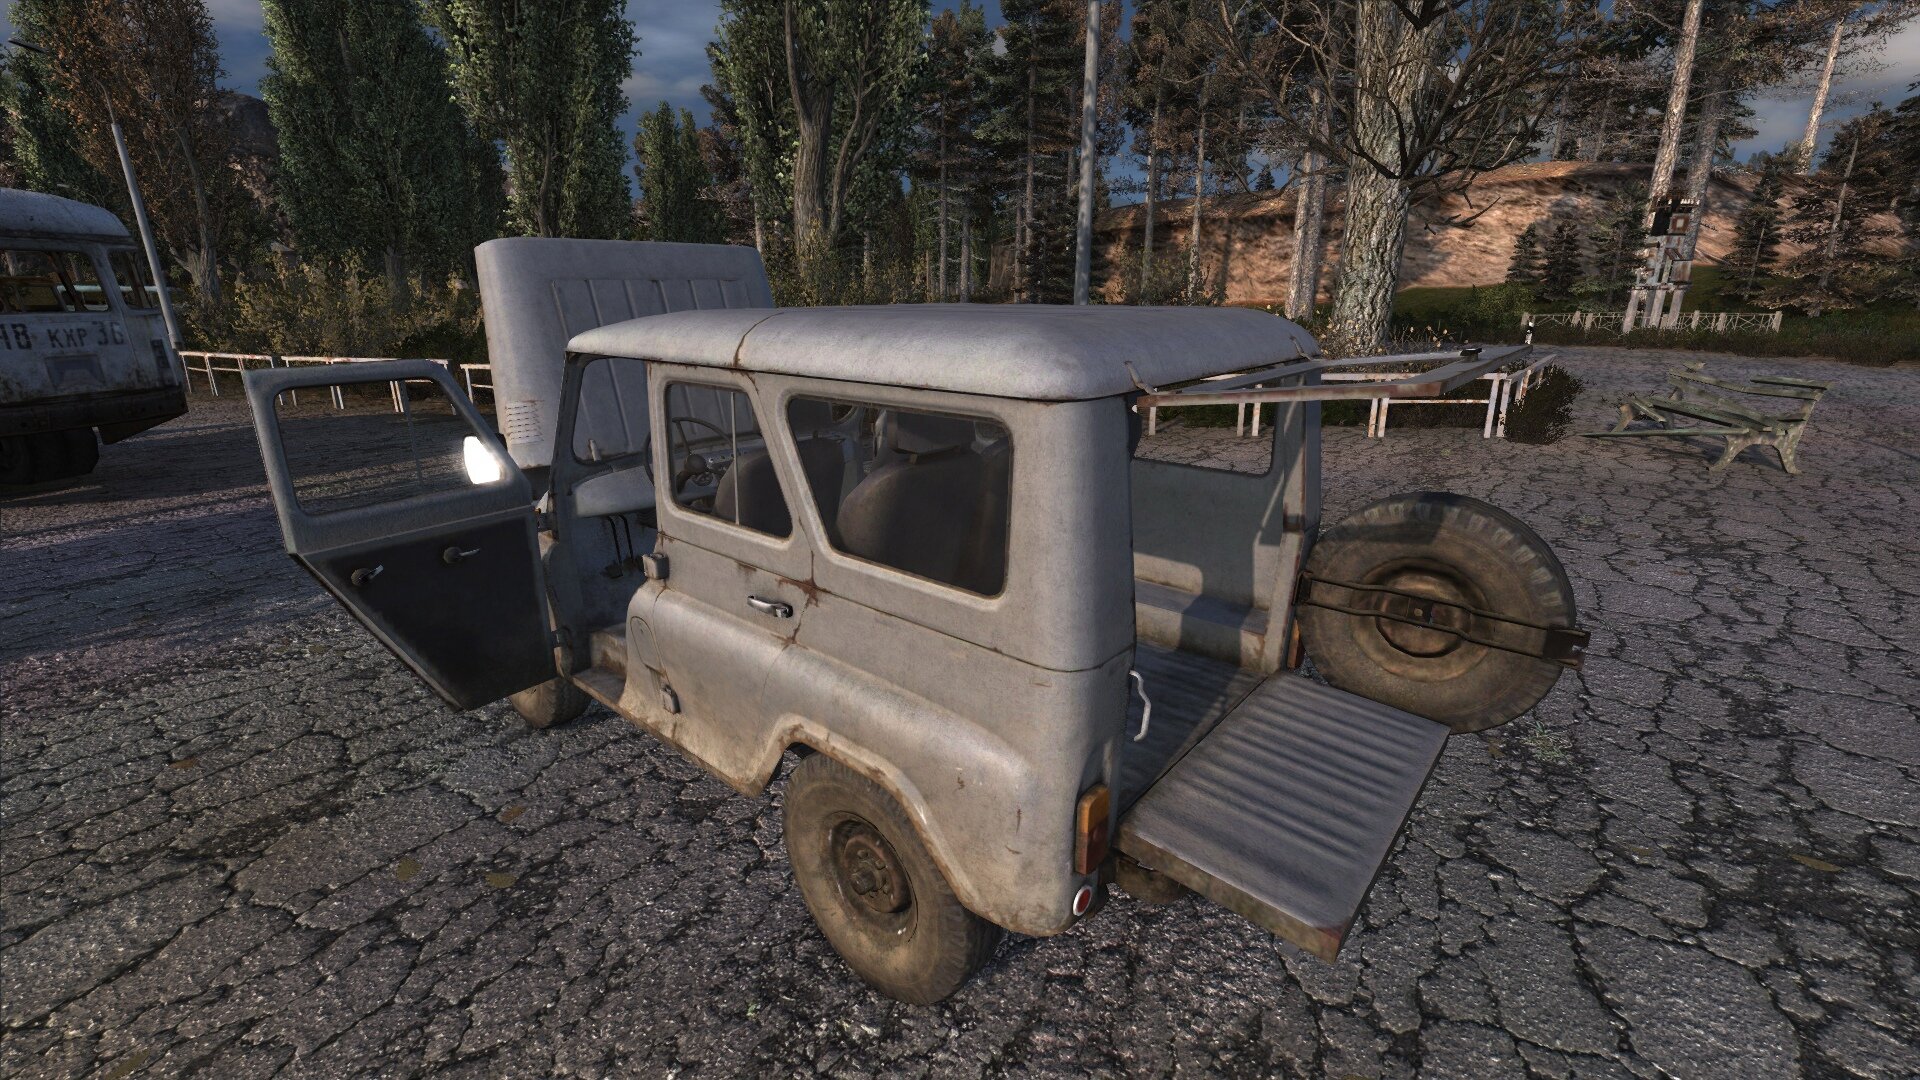 Lost alpha definitive car pack addon. Definitive car Pack Addon сталкер. Definitive Edition car Stalker УАЗ 468. Дефинитив кар пак аддон. Definitive car Pack Lost.